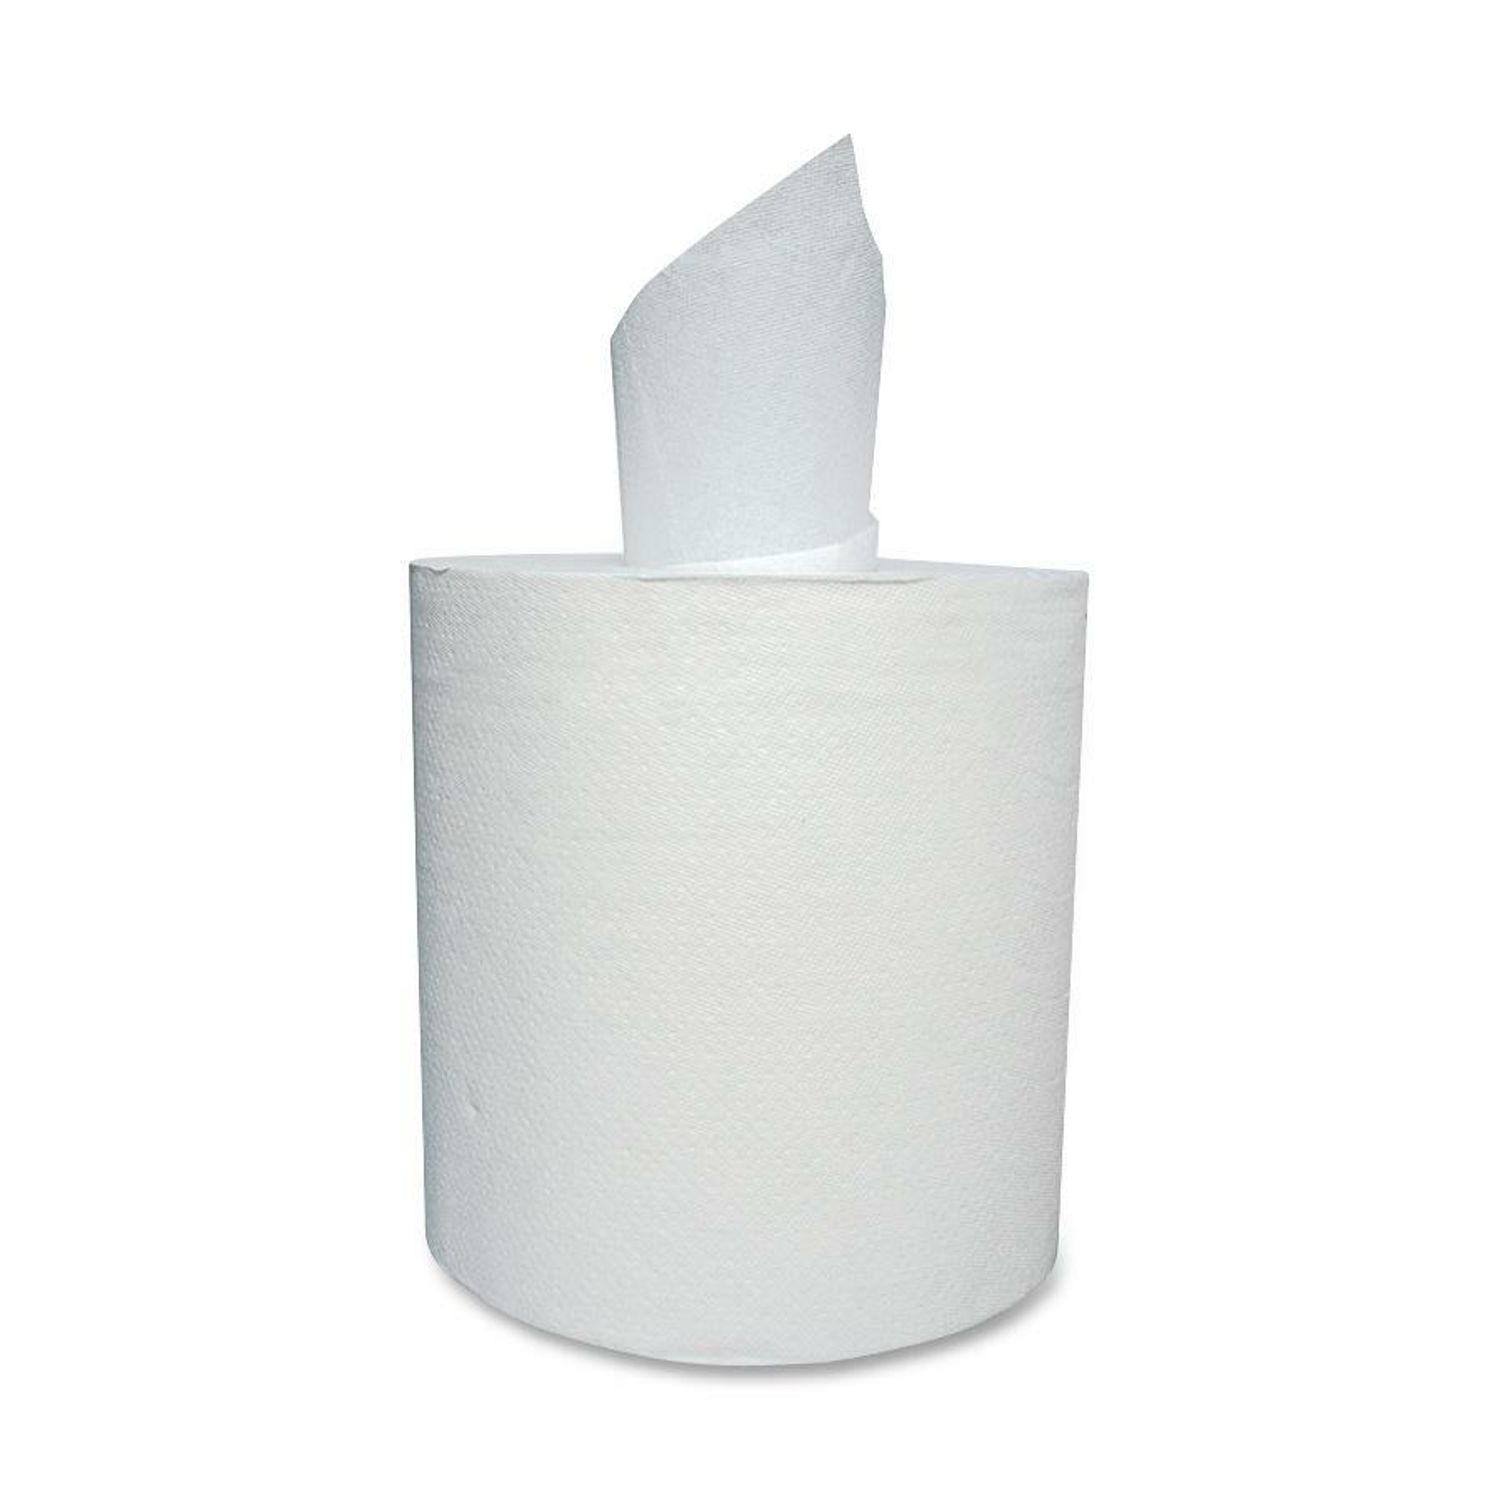 2-Ply Center Pull Paper Towels 2 Ply, 7.60" x 10", 8" Roll Diameter, White, Paper, Perforated, Embossed, Absorbent, 6 / Carton